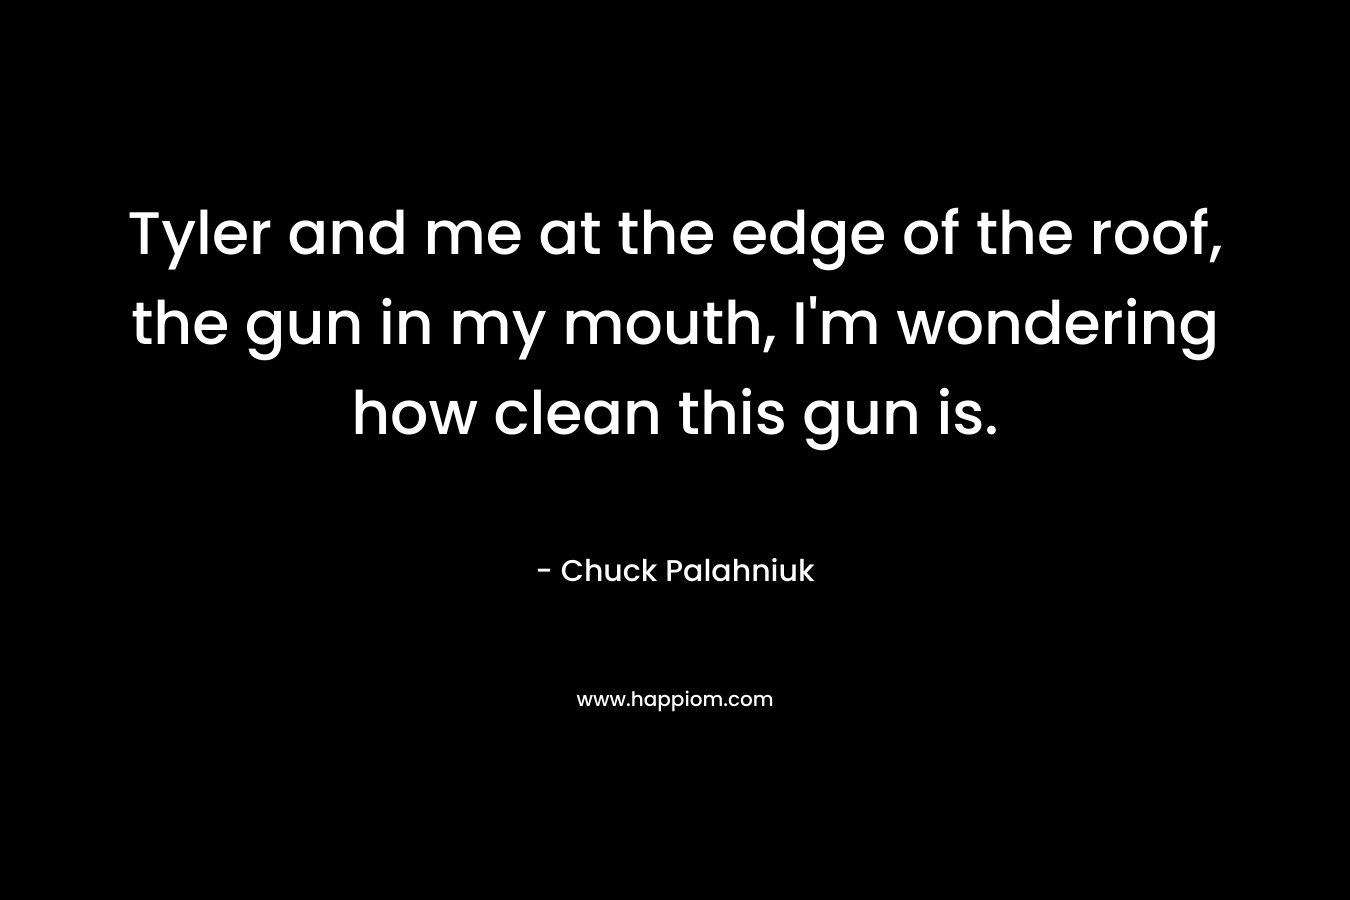 Tyler and me at the edge of the roof, the gun in my mouth, I’m wondering how clean this gun is. – Chuck Palahniuk